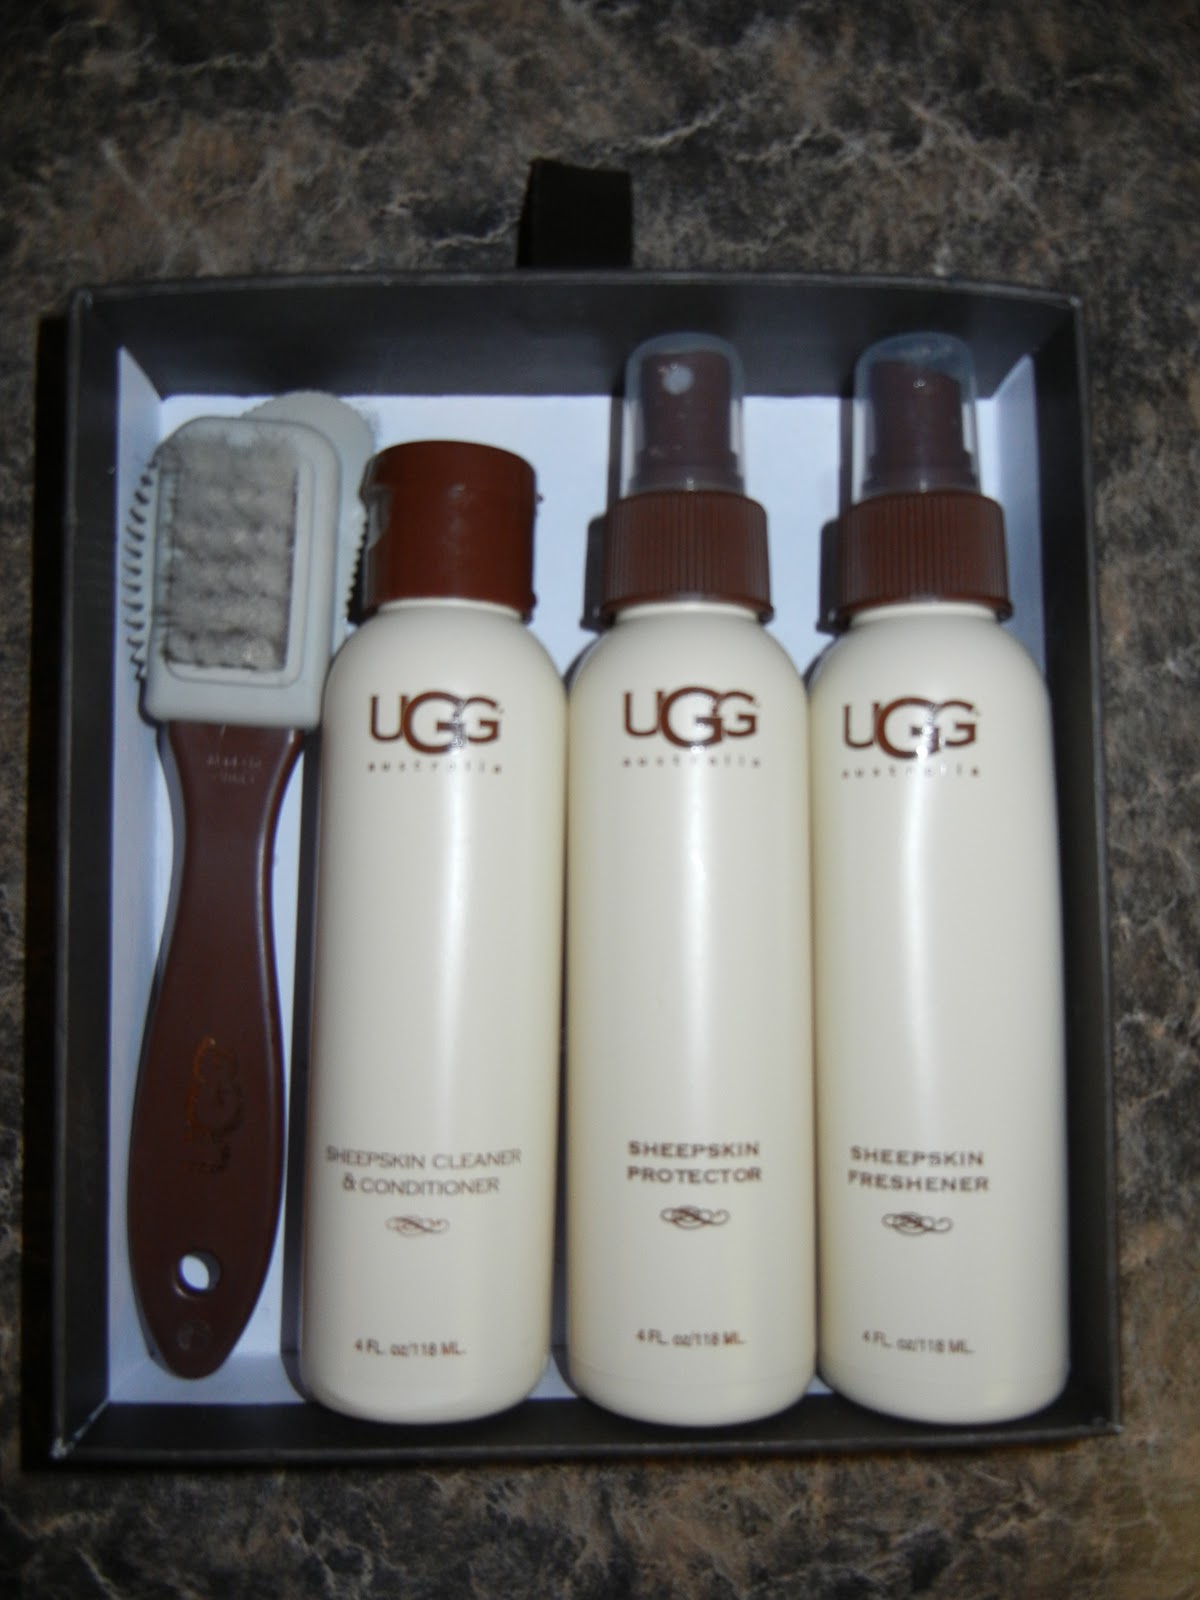 ugg sheepskin cleaner and conditioner